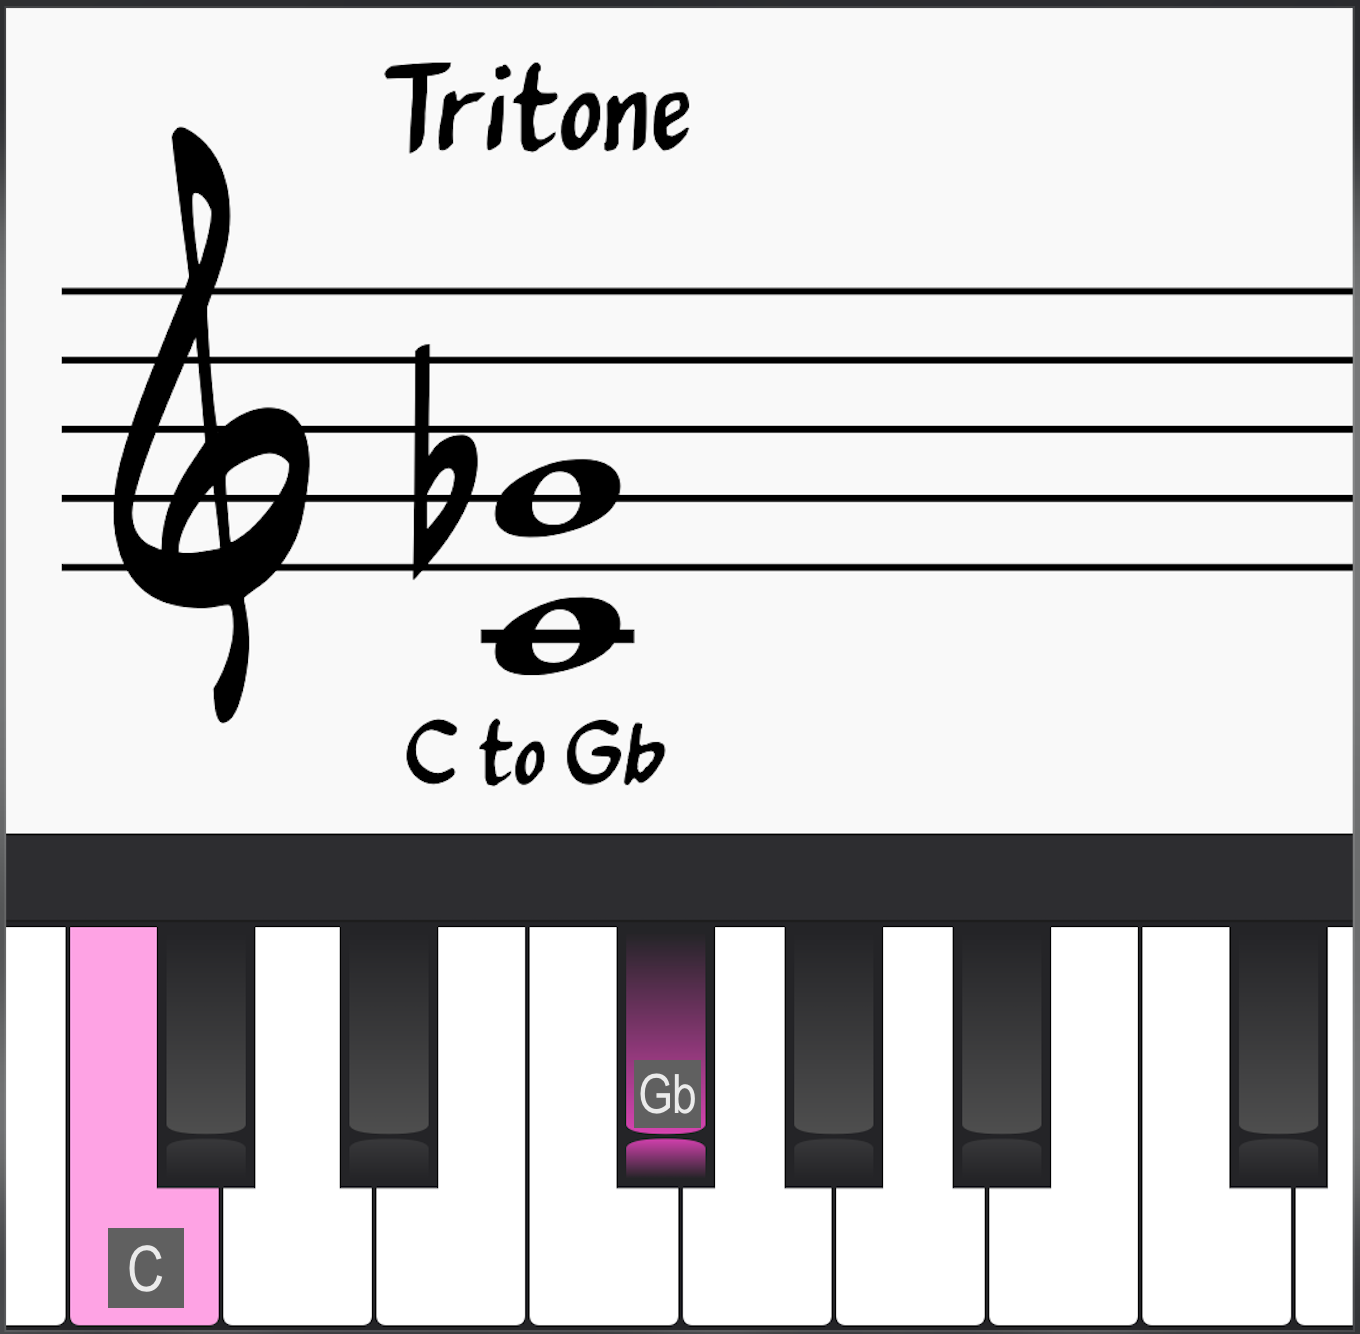 Tritone (Diminished Interval/Augmented Interval): C to F#/Gb